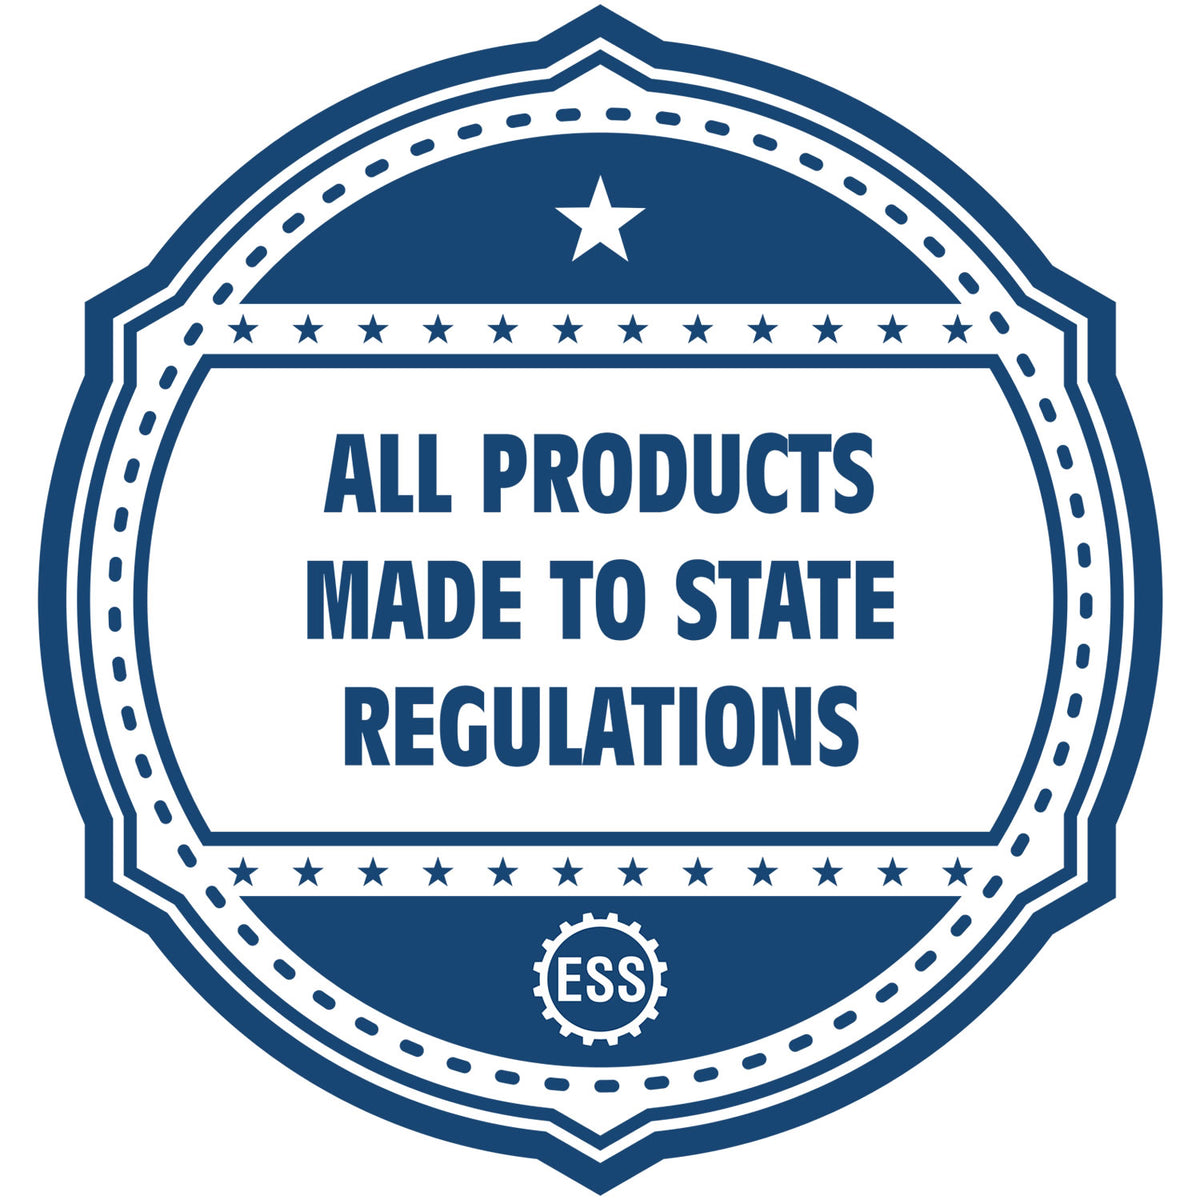 An icon or badge element for the Heavy-Duty Mississippi Rectangular Notary Stamp showing that this product is made in compliance with state regulations.